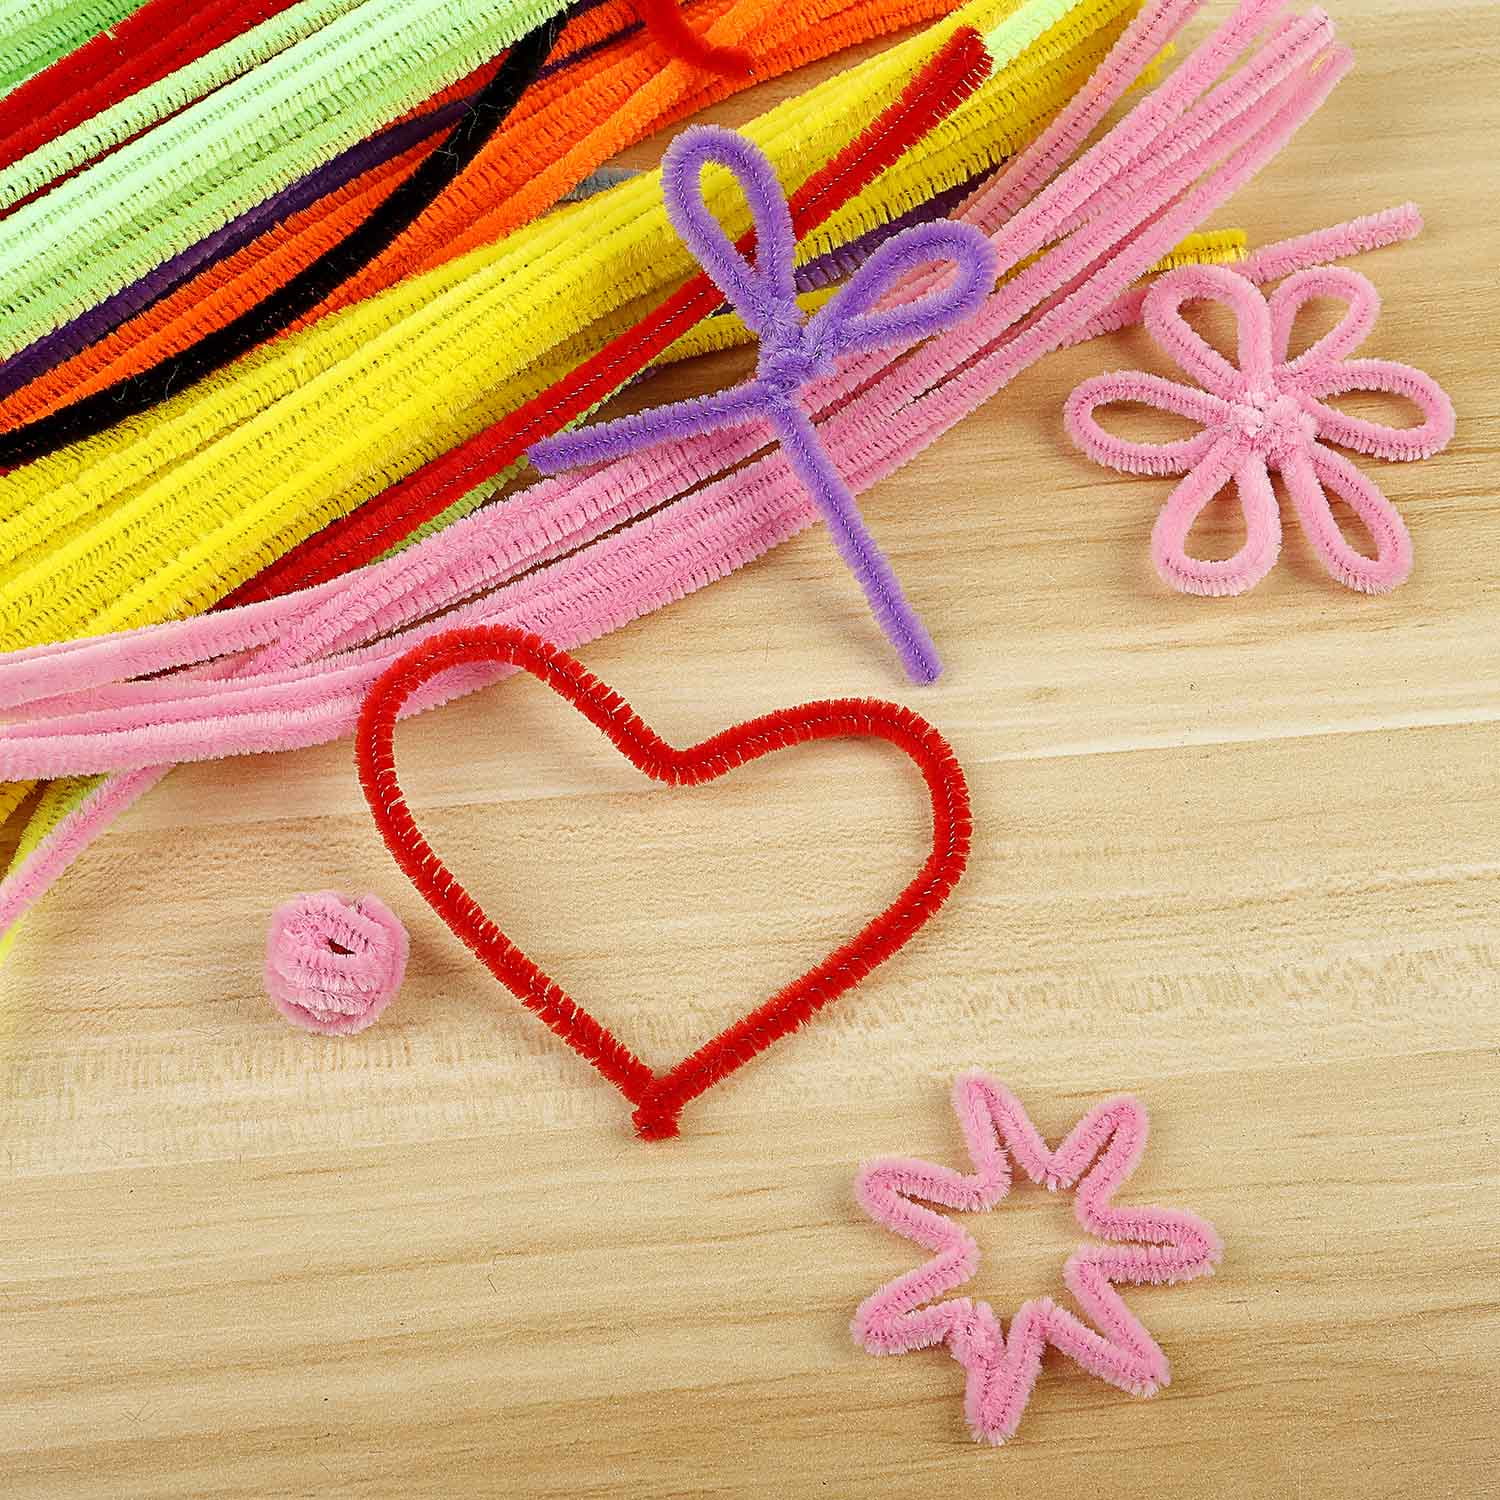  SAFIGLE 100 Pcs DIY Crafts Pipe Stem Pipe Favors Pipe Cleaners  Bulk DIY Art Pipe Cleaners Pastel Pipe Cleaners Plumbing The Gift DIY Toys  Kid Gifts Party Favors Decorate Child Pipeline 